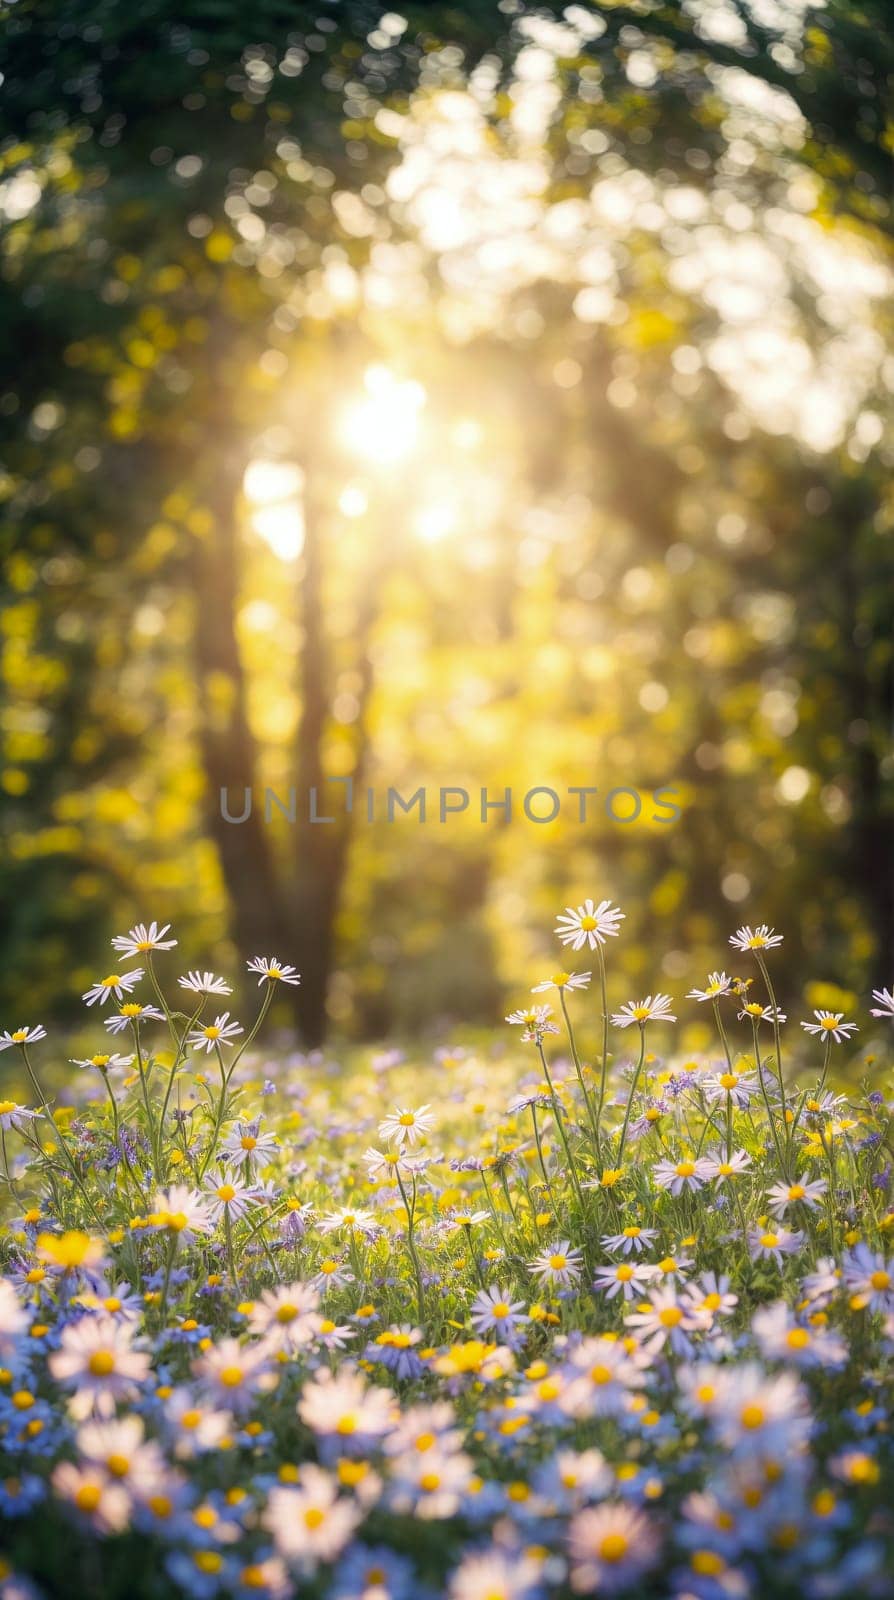 Sunlit Field of Daisies Through Trees by chrisroll